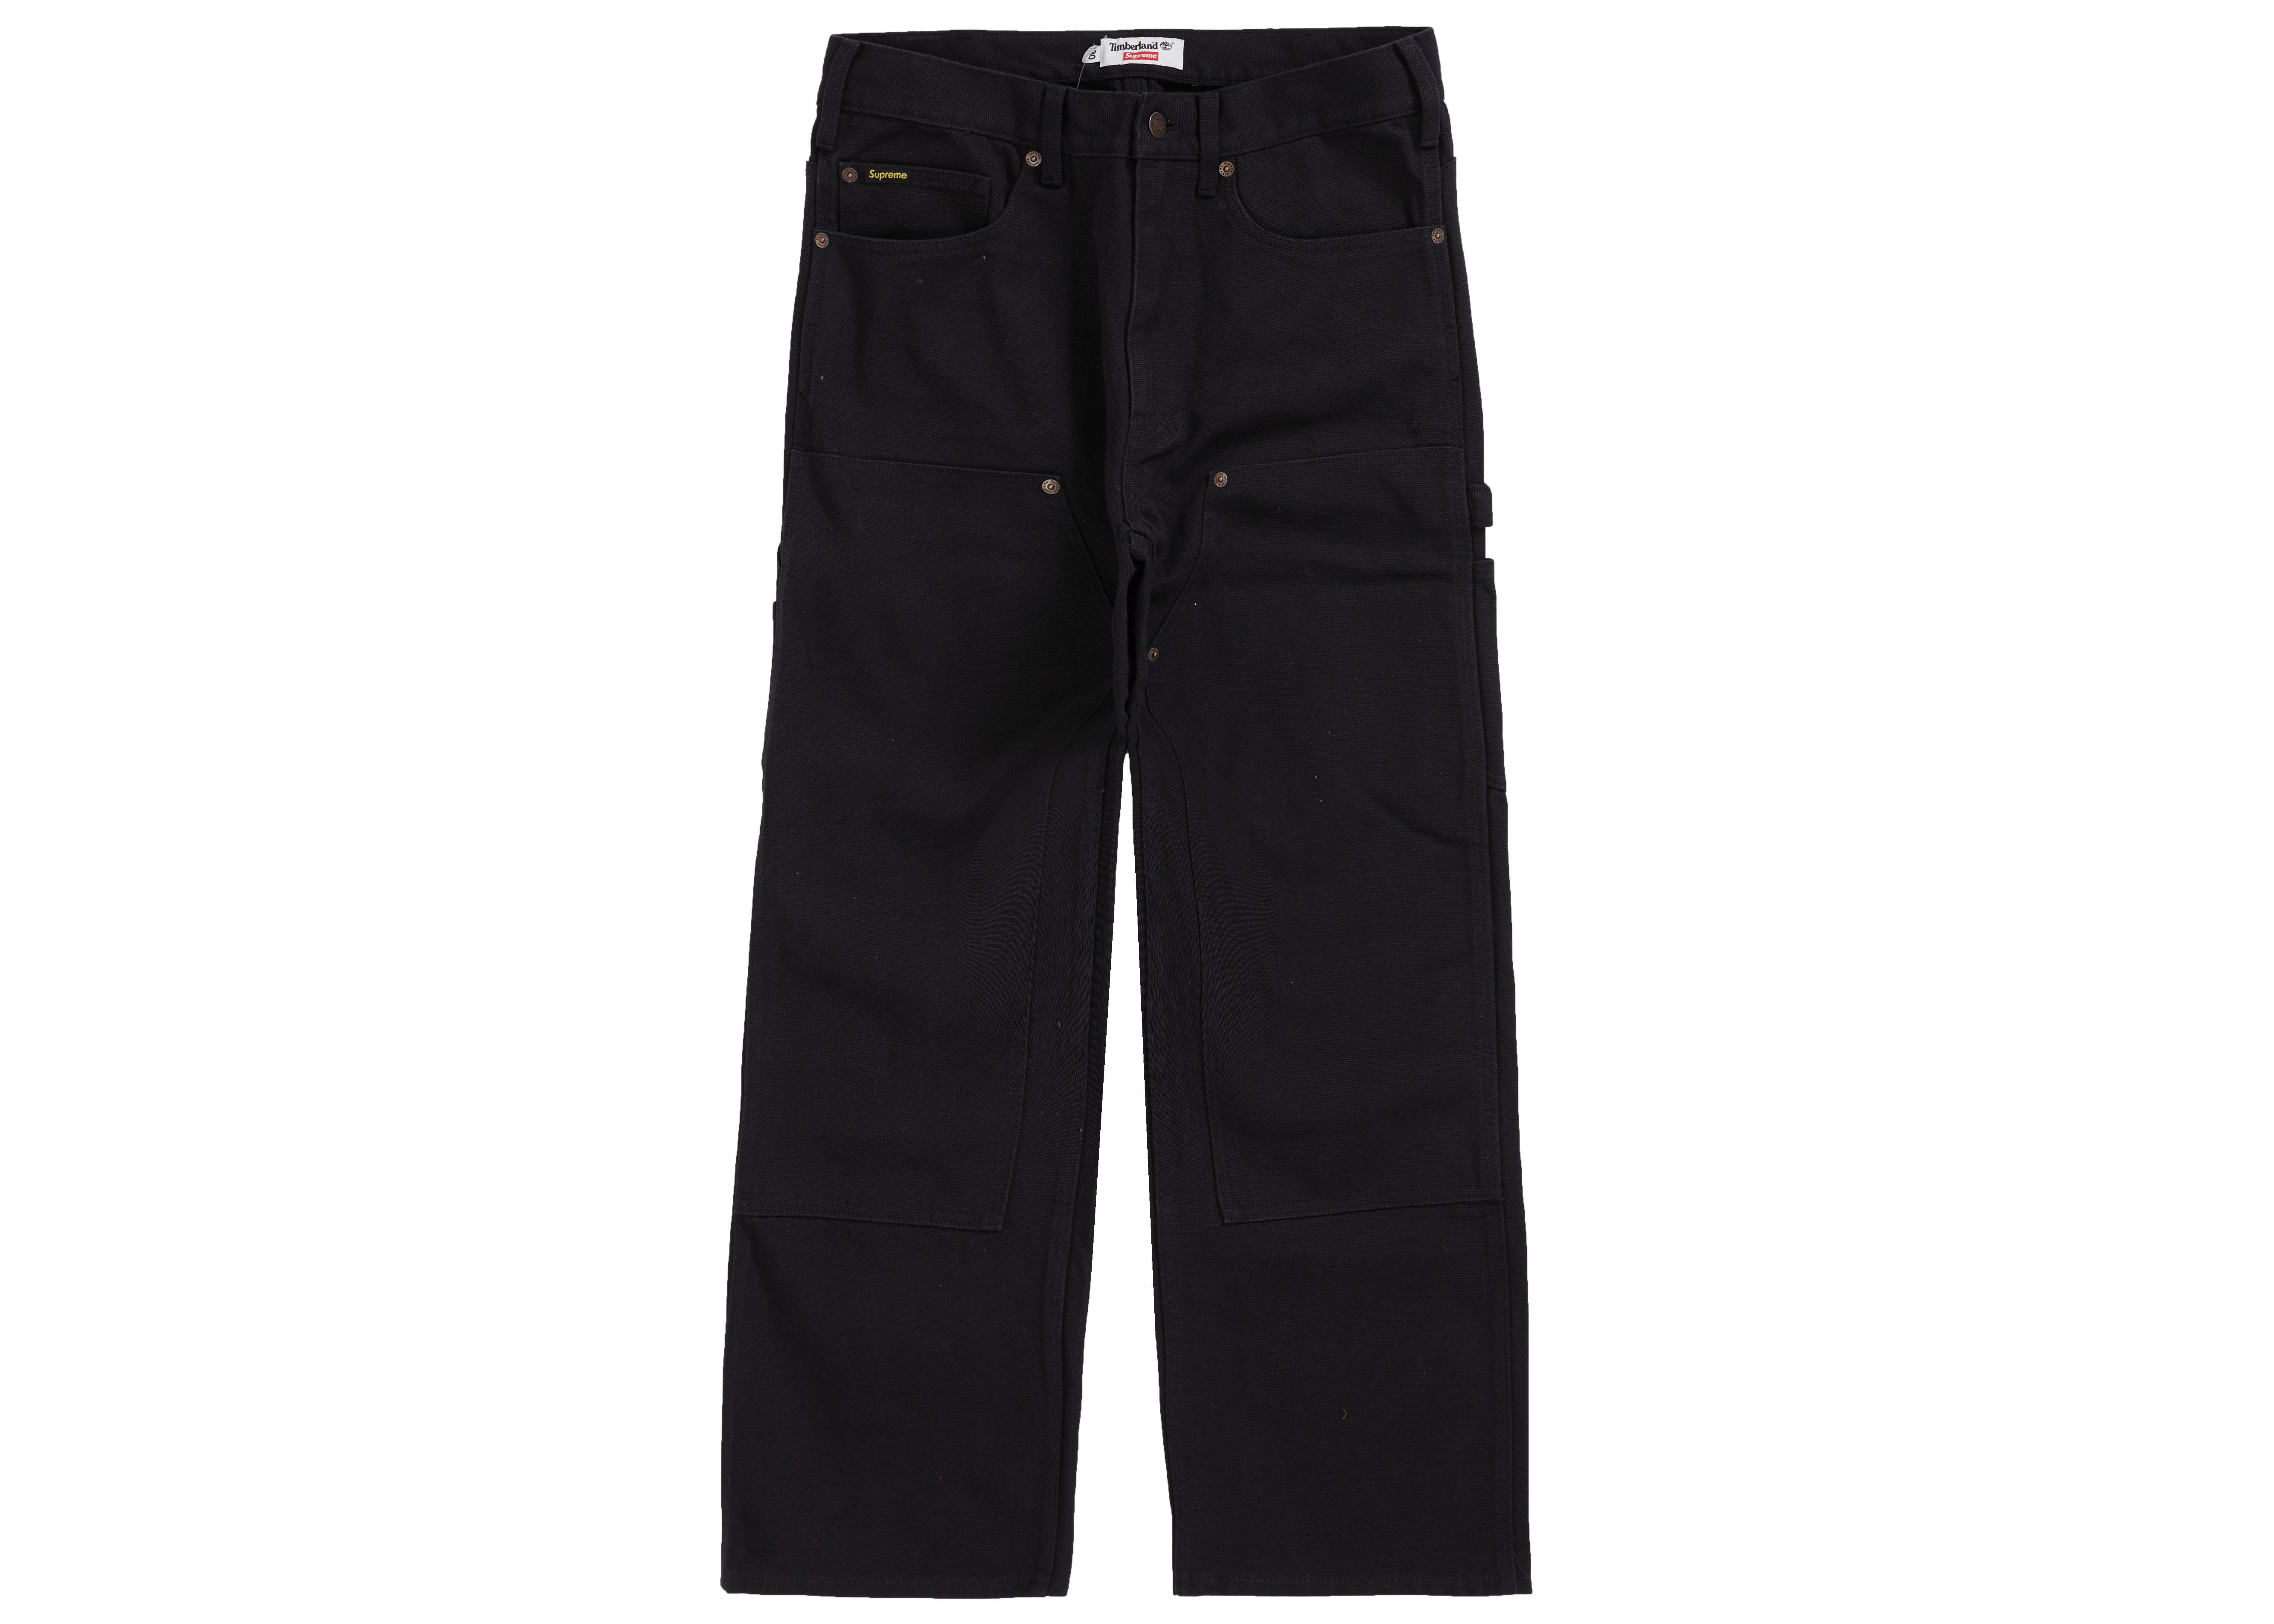 Supreme Timberland Double Knee Painter Pant Black - SS21 - US